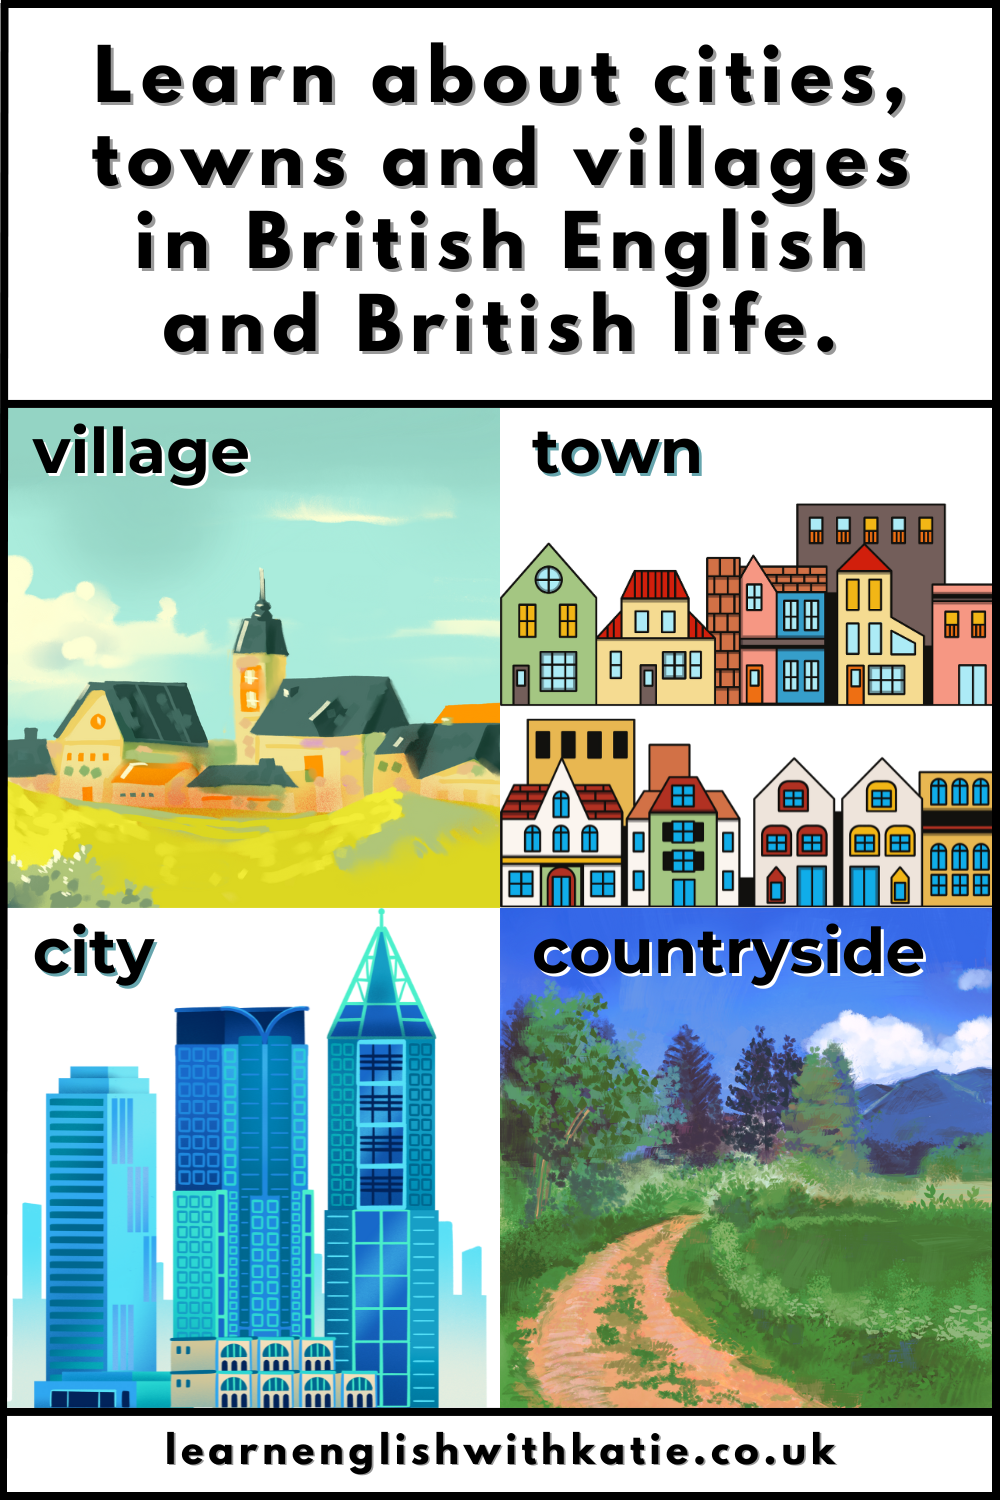 Pinterest pin showing four images: city, town, village and countryside